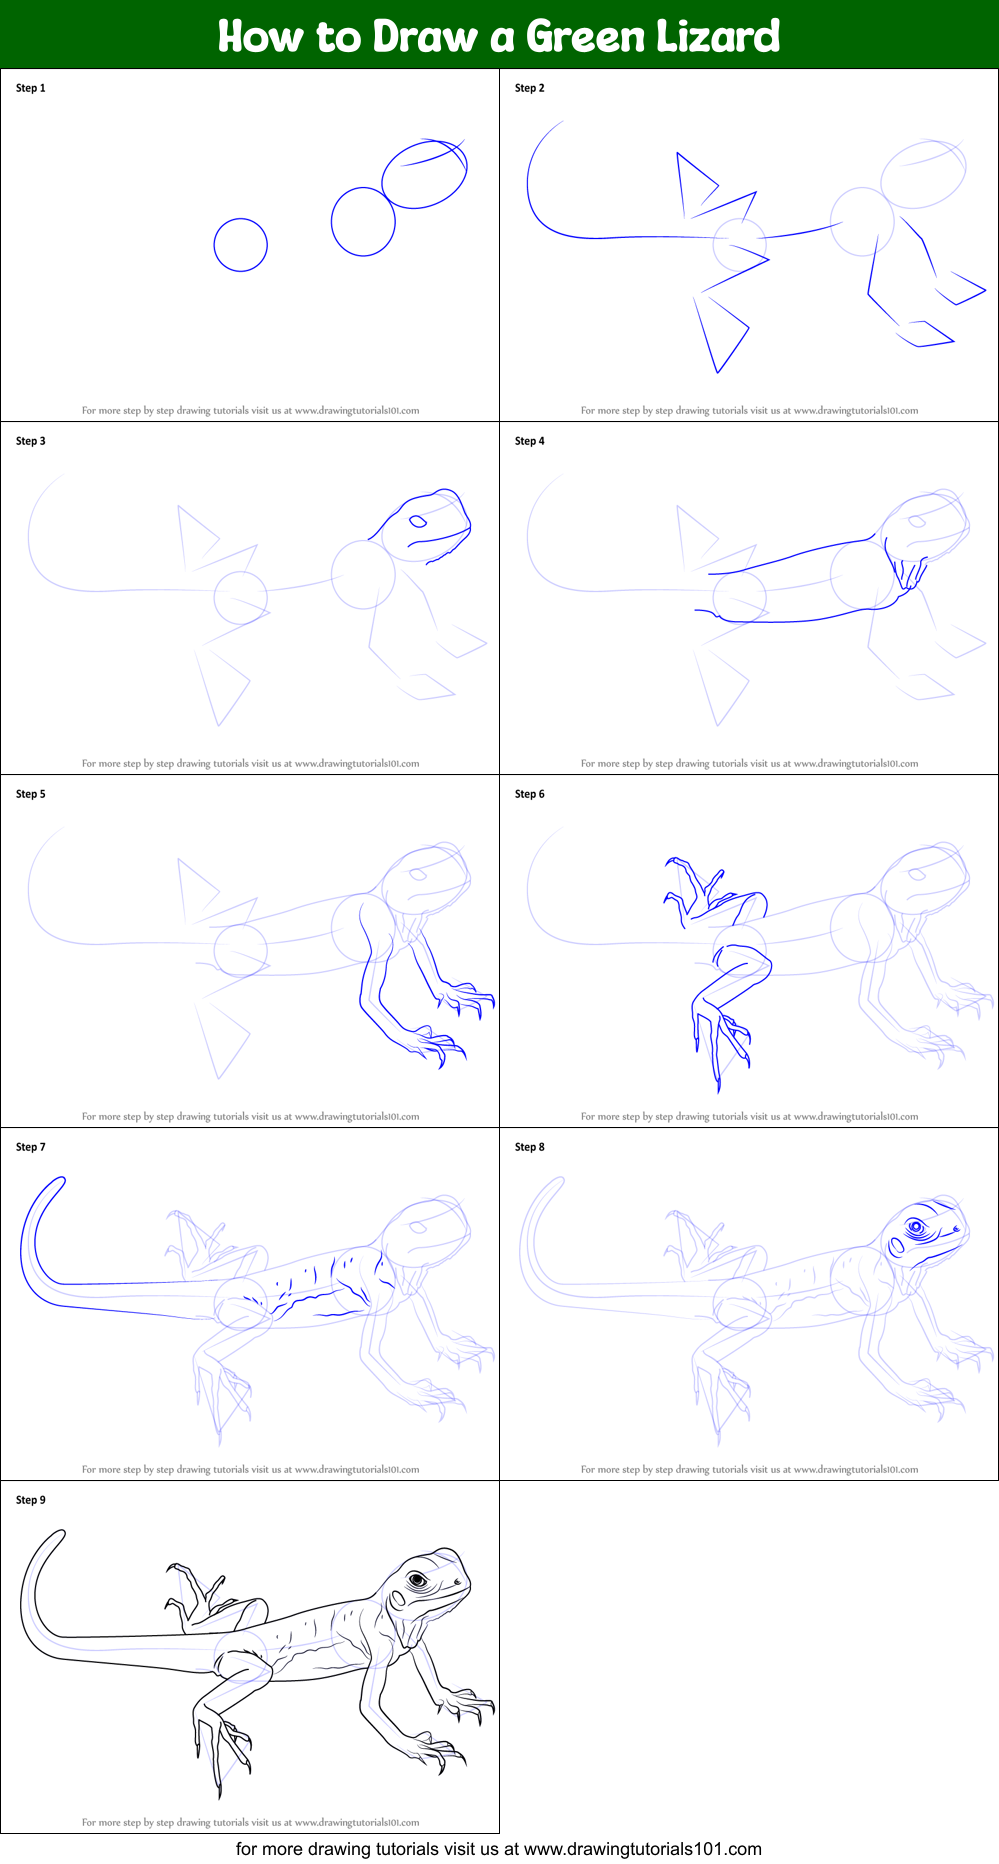 Top How To Draw A Cartoon Lizard Step By Step in the world Learn more here 